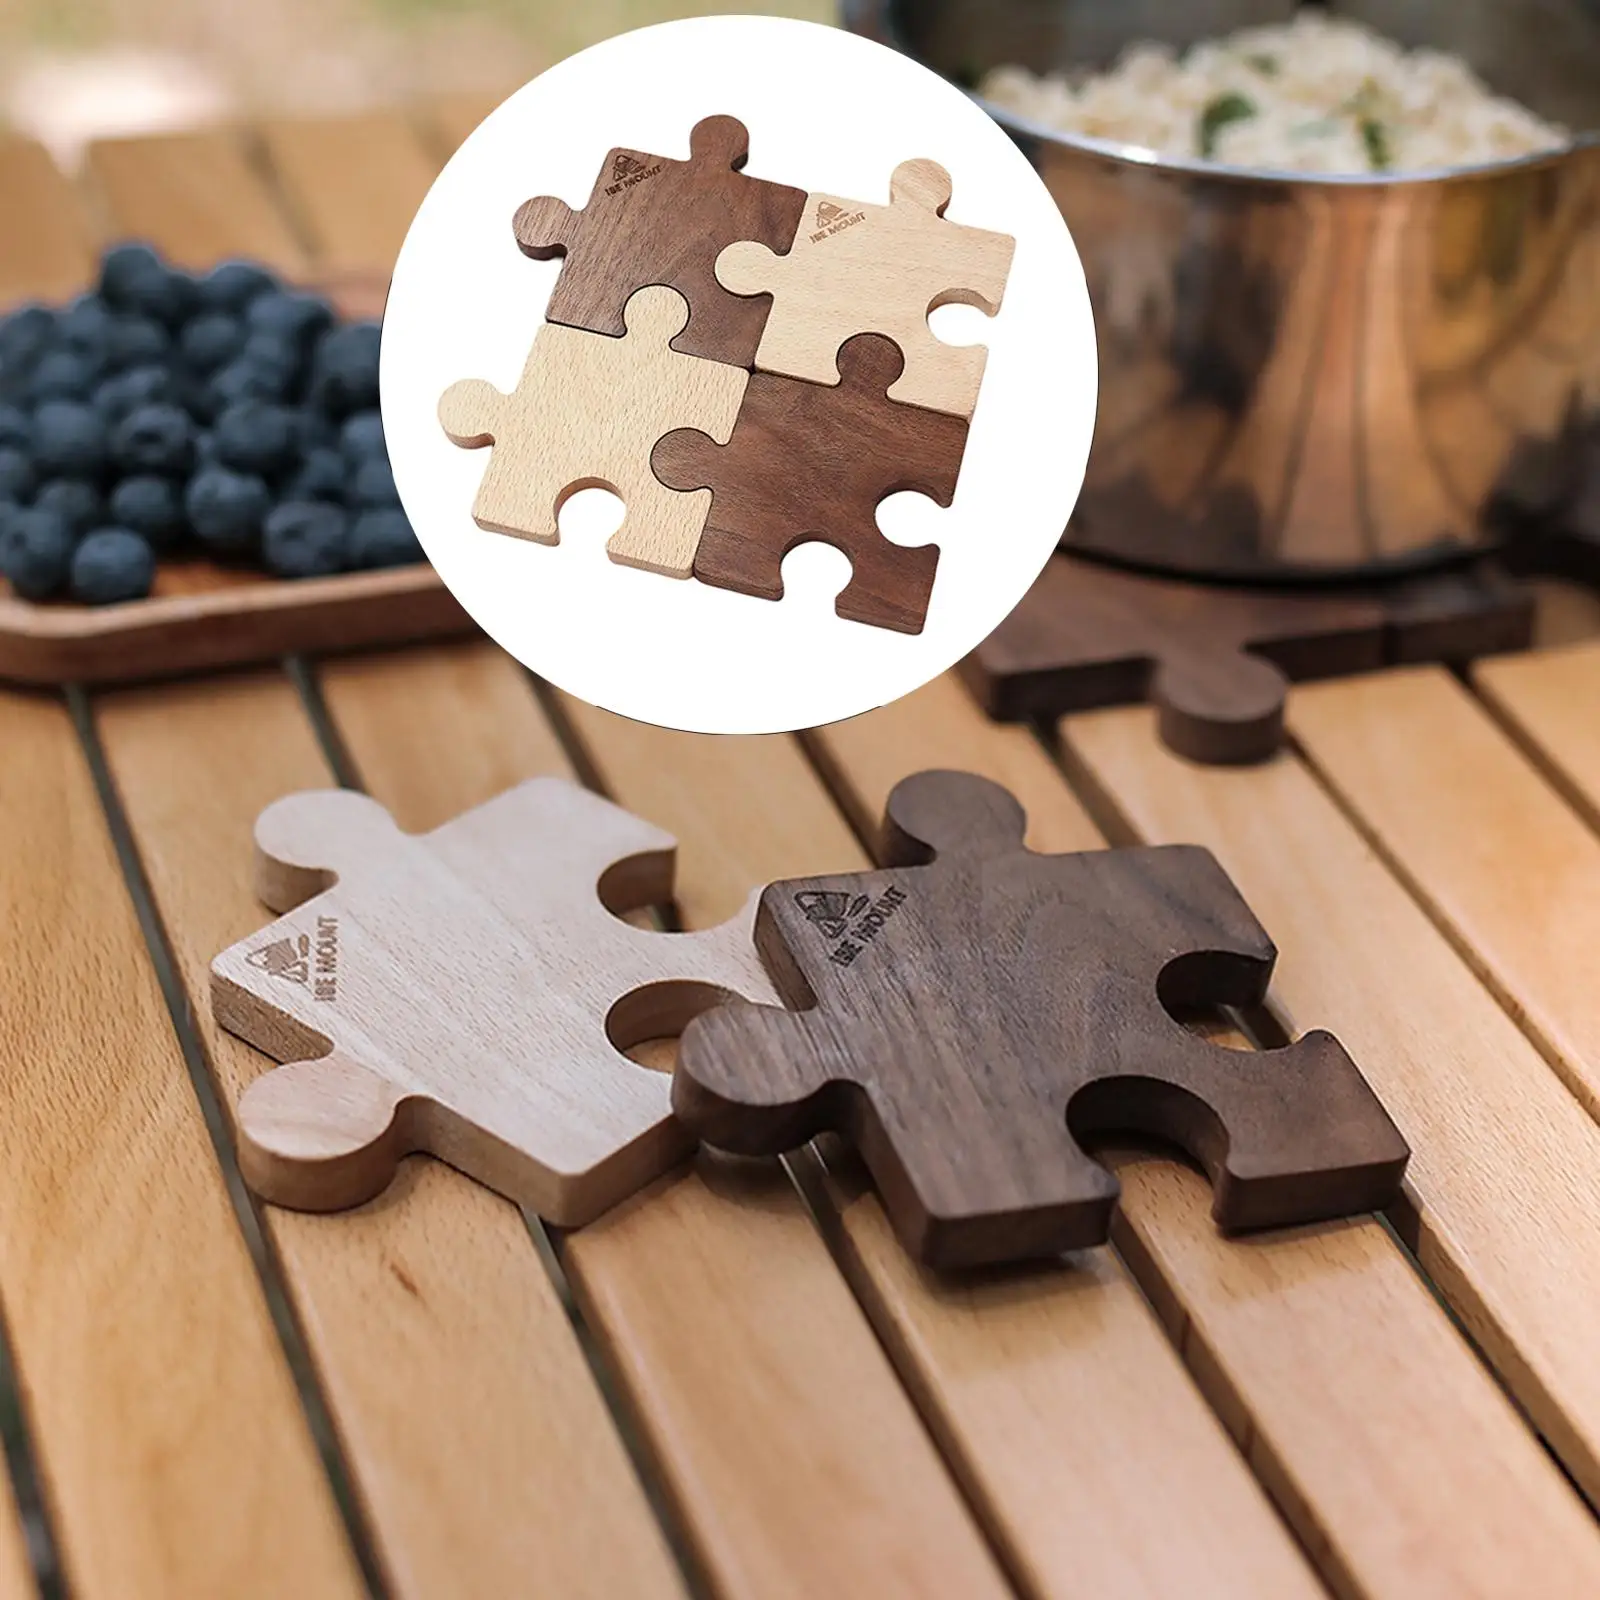 4x Wooden Coasters Jigsaw Puzzle Design Ornament Creative Coffee Mug Pad for Home